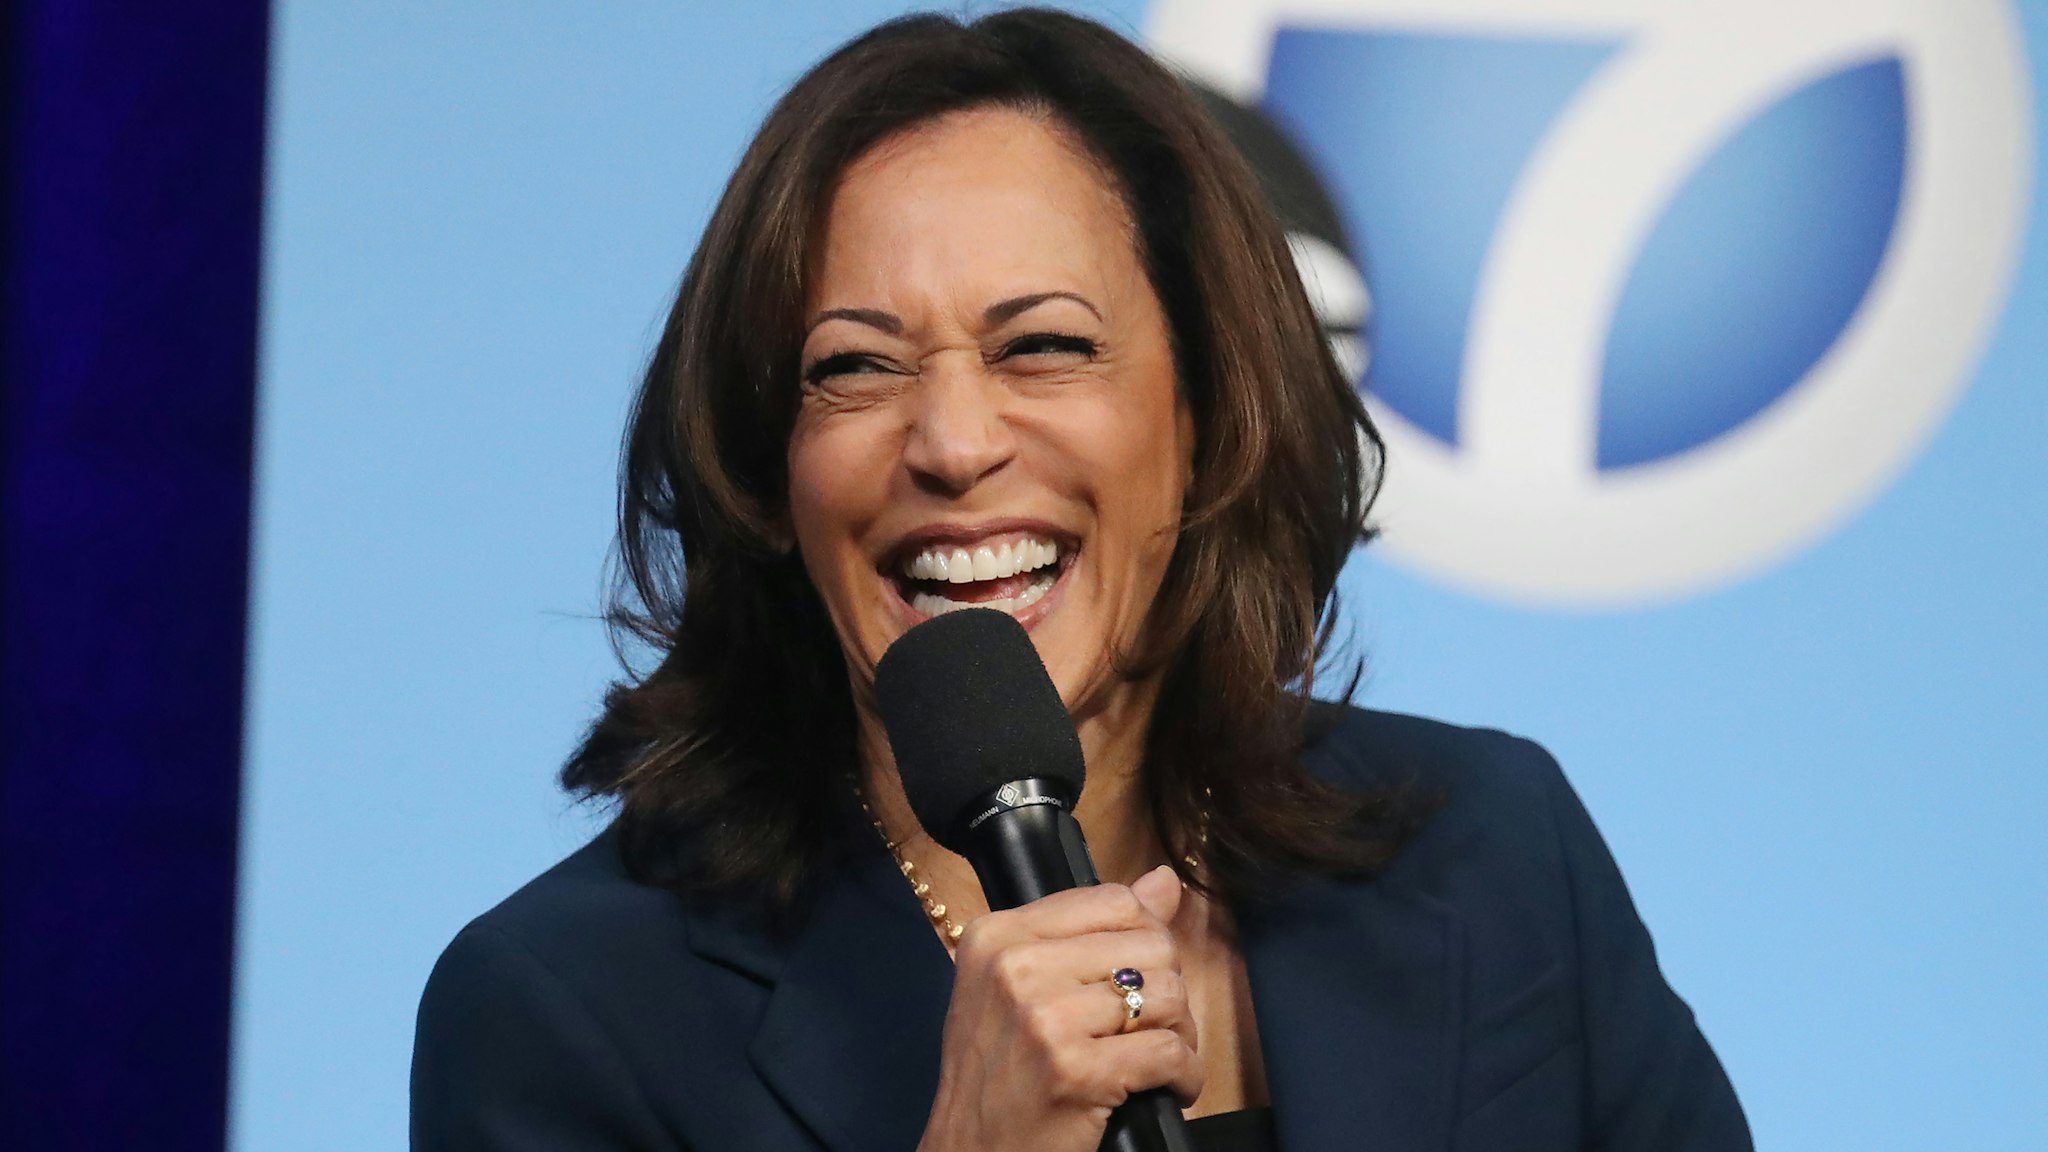 Democratic presidential candidate Sen. Kamala Harris (D-CA) laughs at a Democratic presidential forum on Latino issues at Cal State L.A. on November 17, 2019 in Los Angeles, California. The presidential primary in California will be held on March 3, 2020.